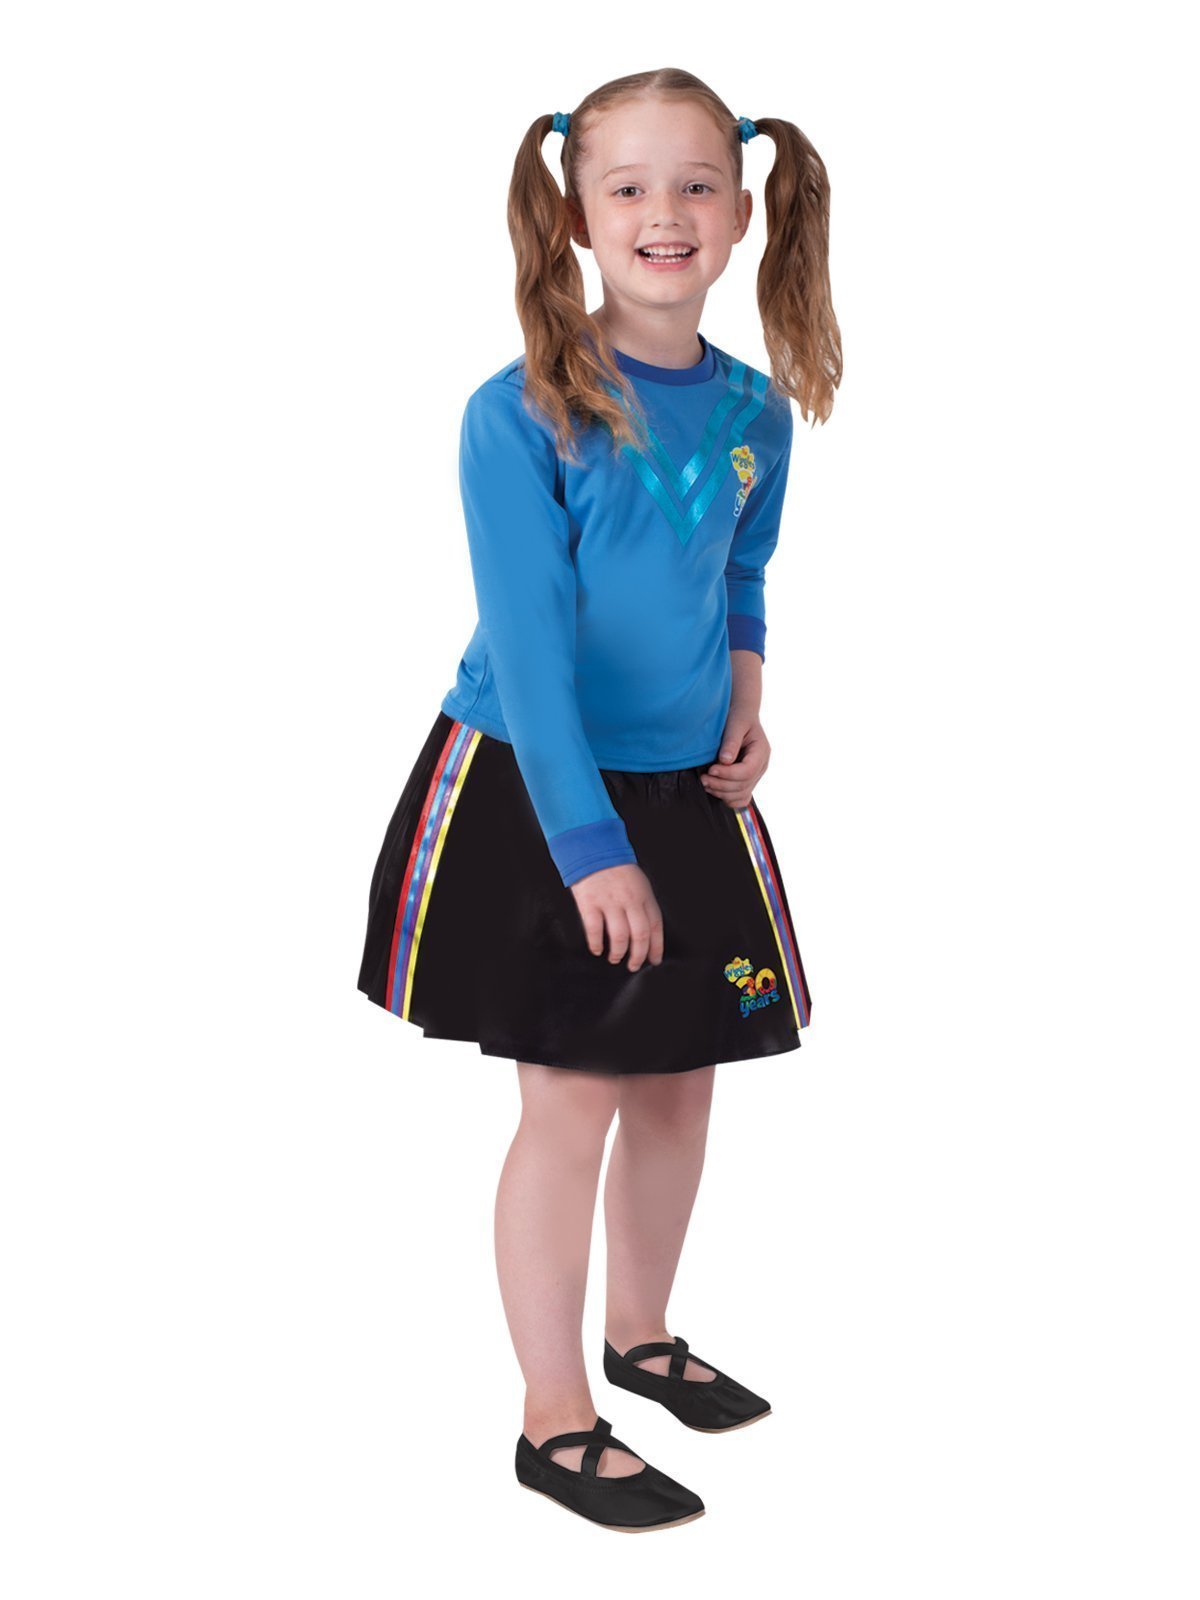 Wiggles 30th Anniversary Skirt for Kids - The Wiggles | Costume ...